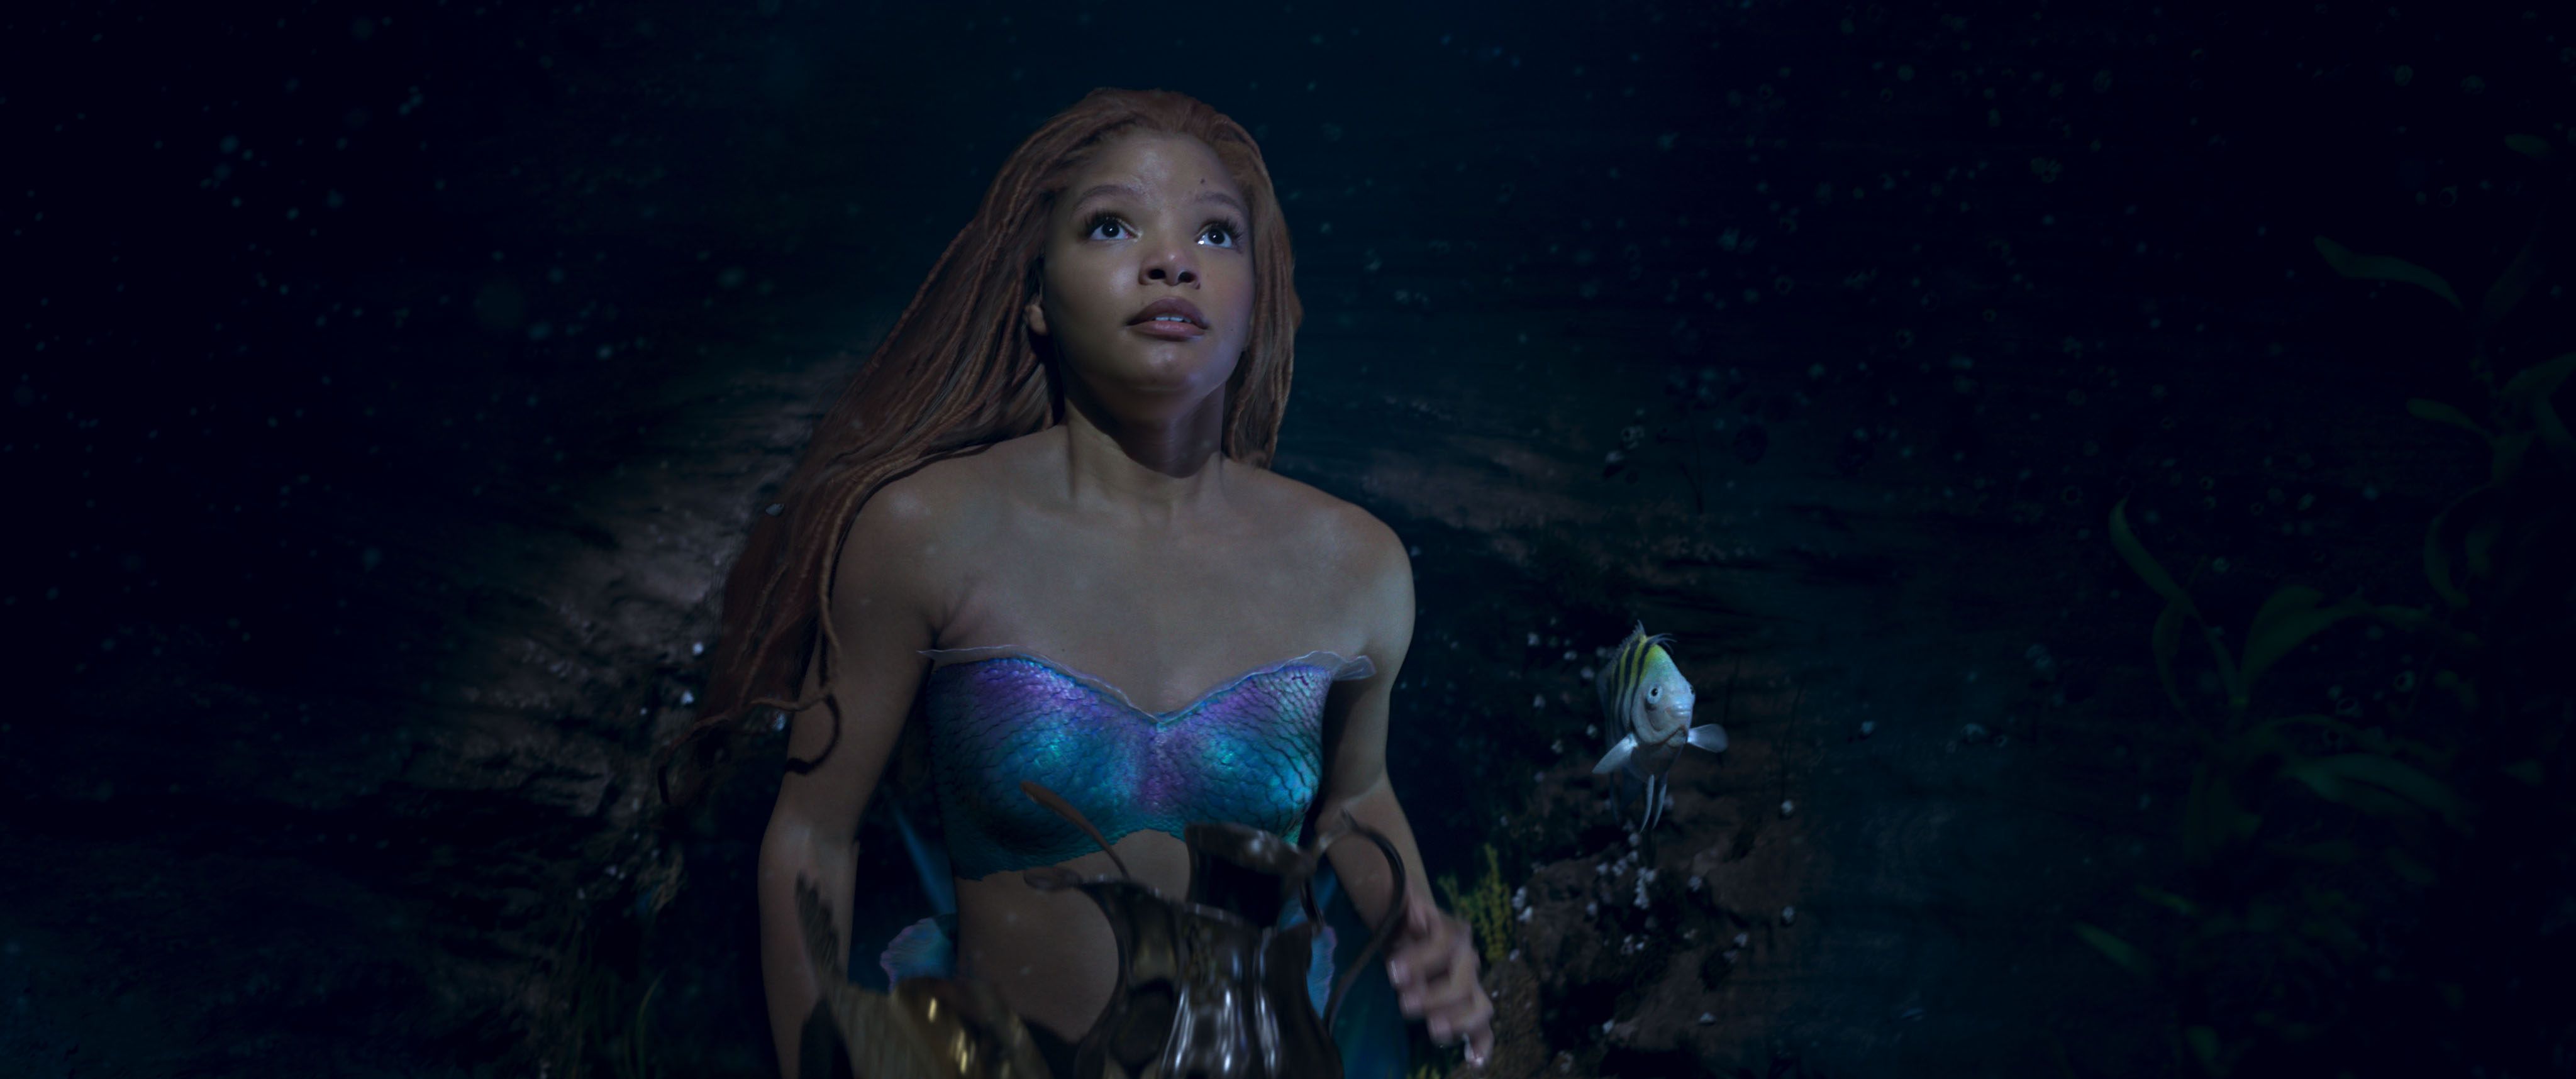 Get Excited for Disney’s ‘The Little Mermaid’ with New Stills from the